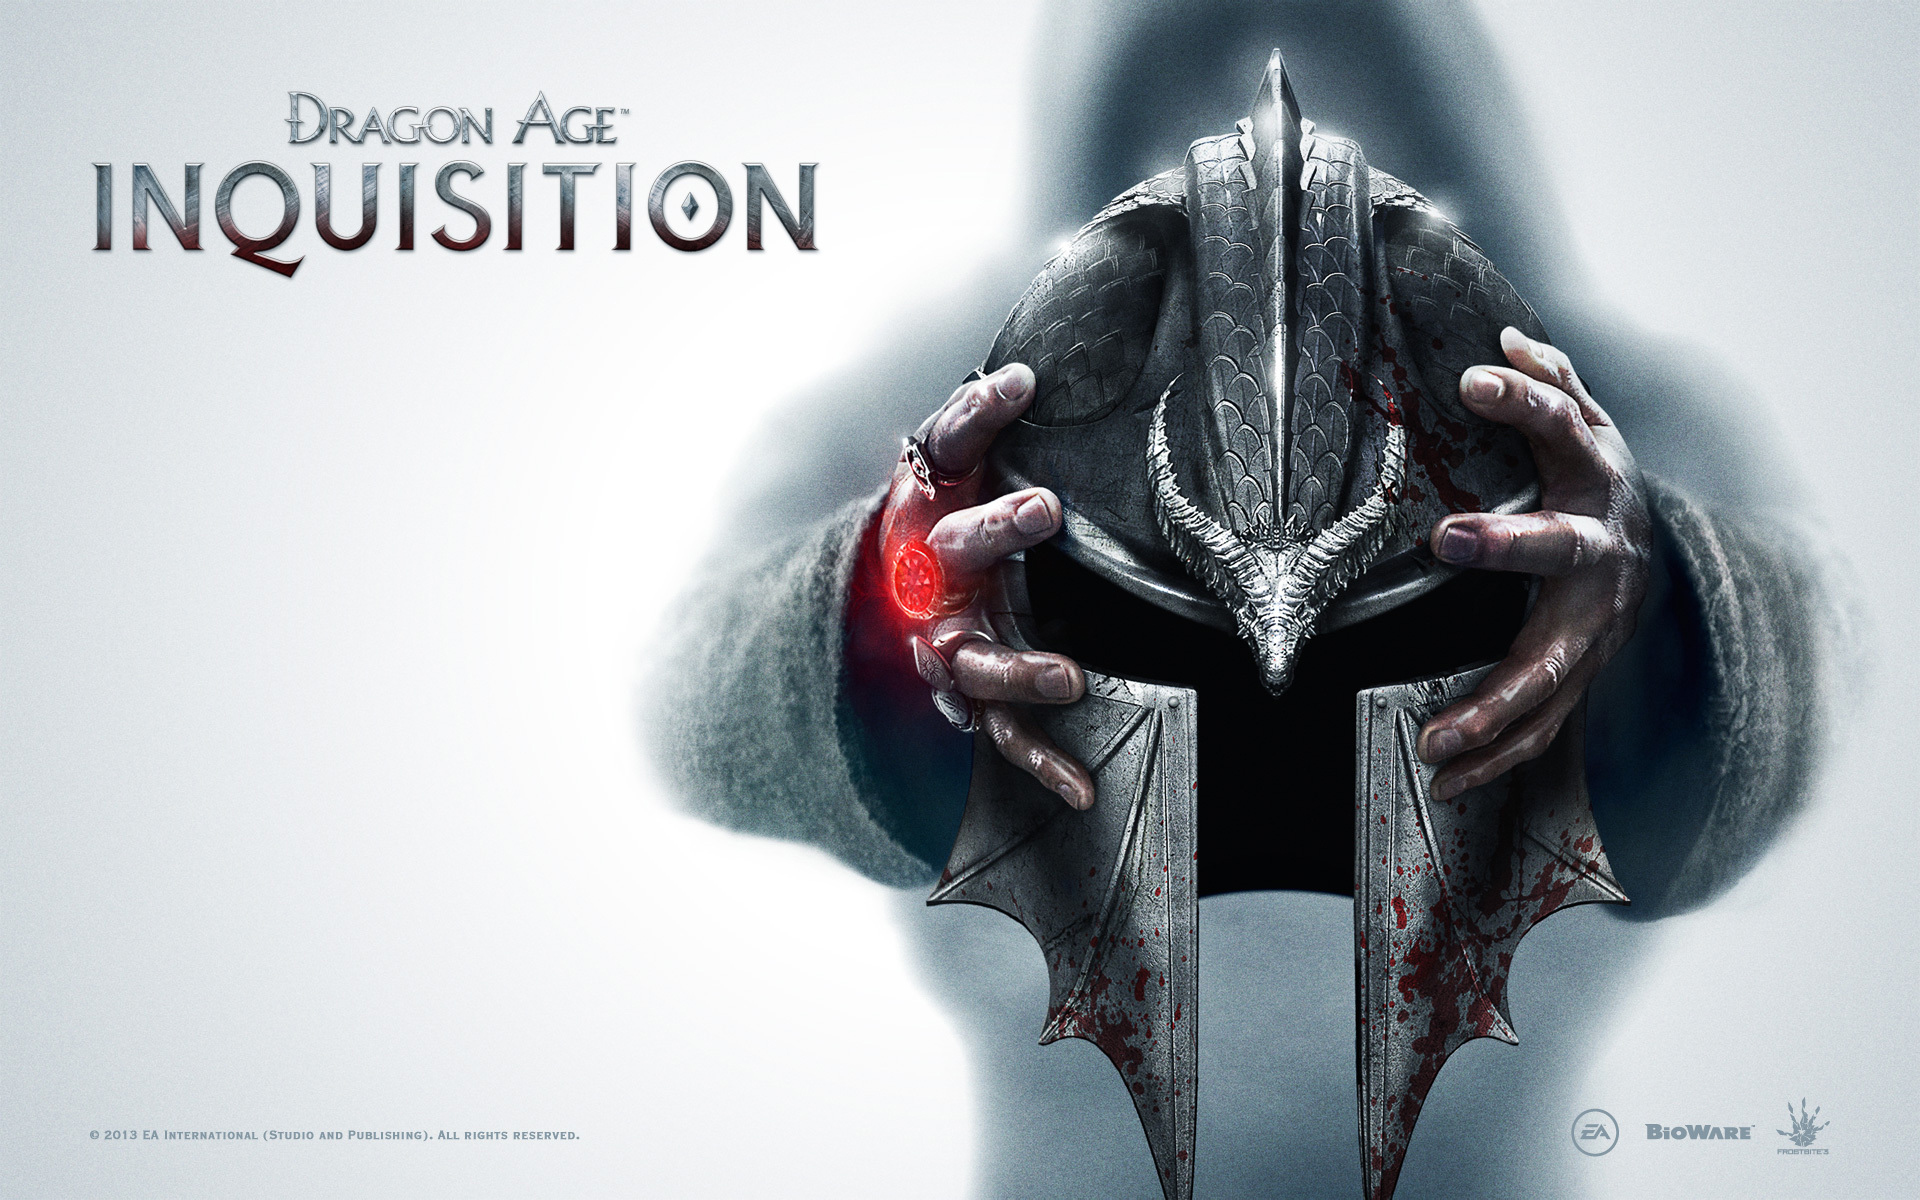 Dragon Age Inquisition Helmet Wallpaper, HD Games 4K Wallpapers, Images,  Photos and Background - Wallpapers Den